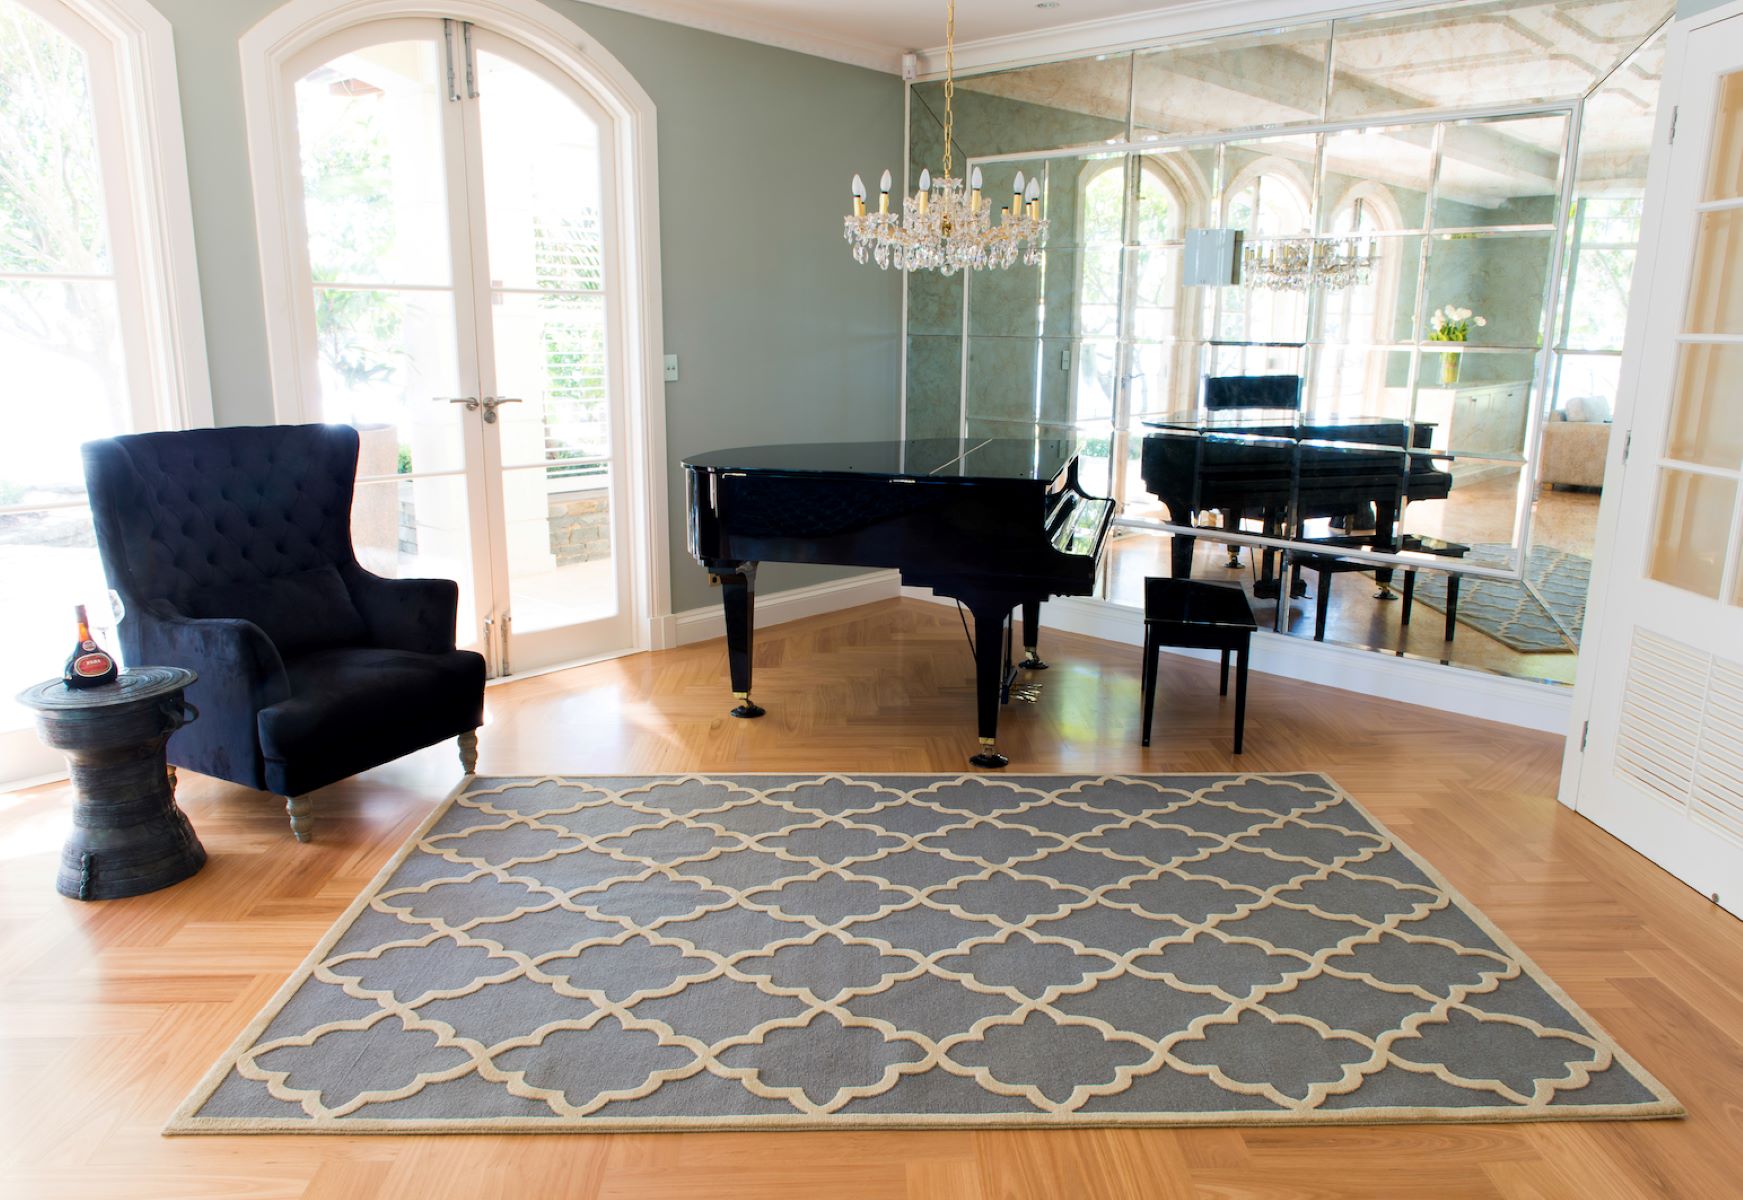 How To Place Area Rugs On Hardwood Floors